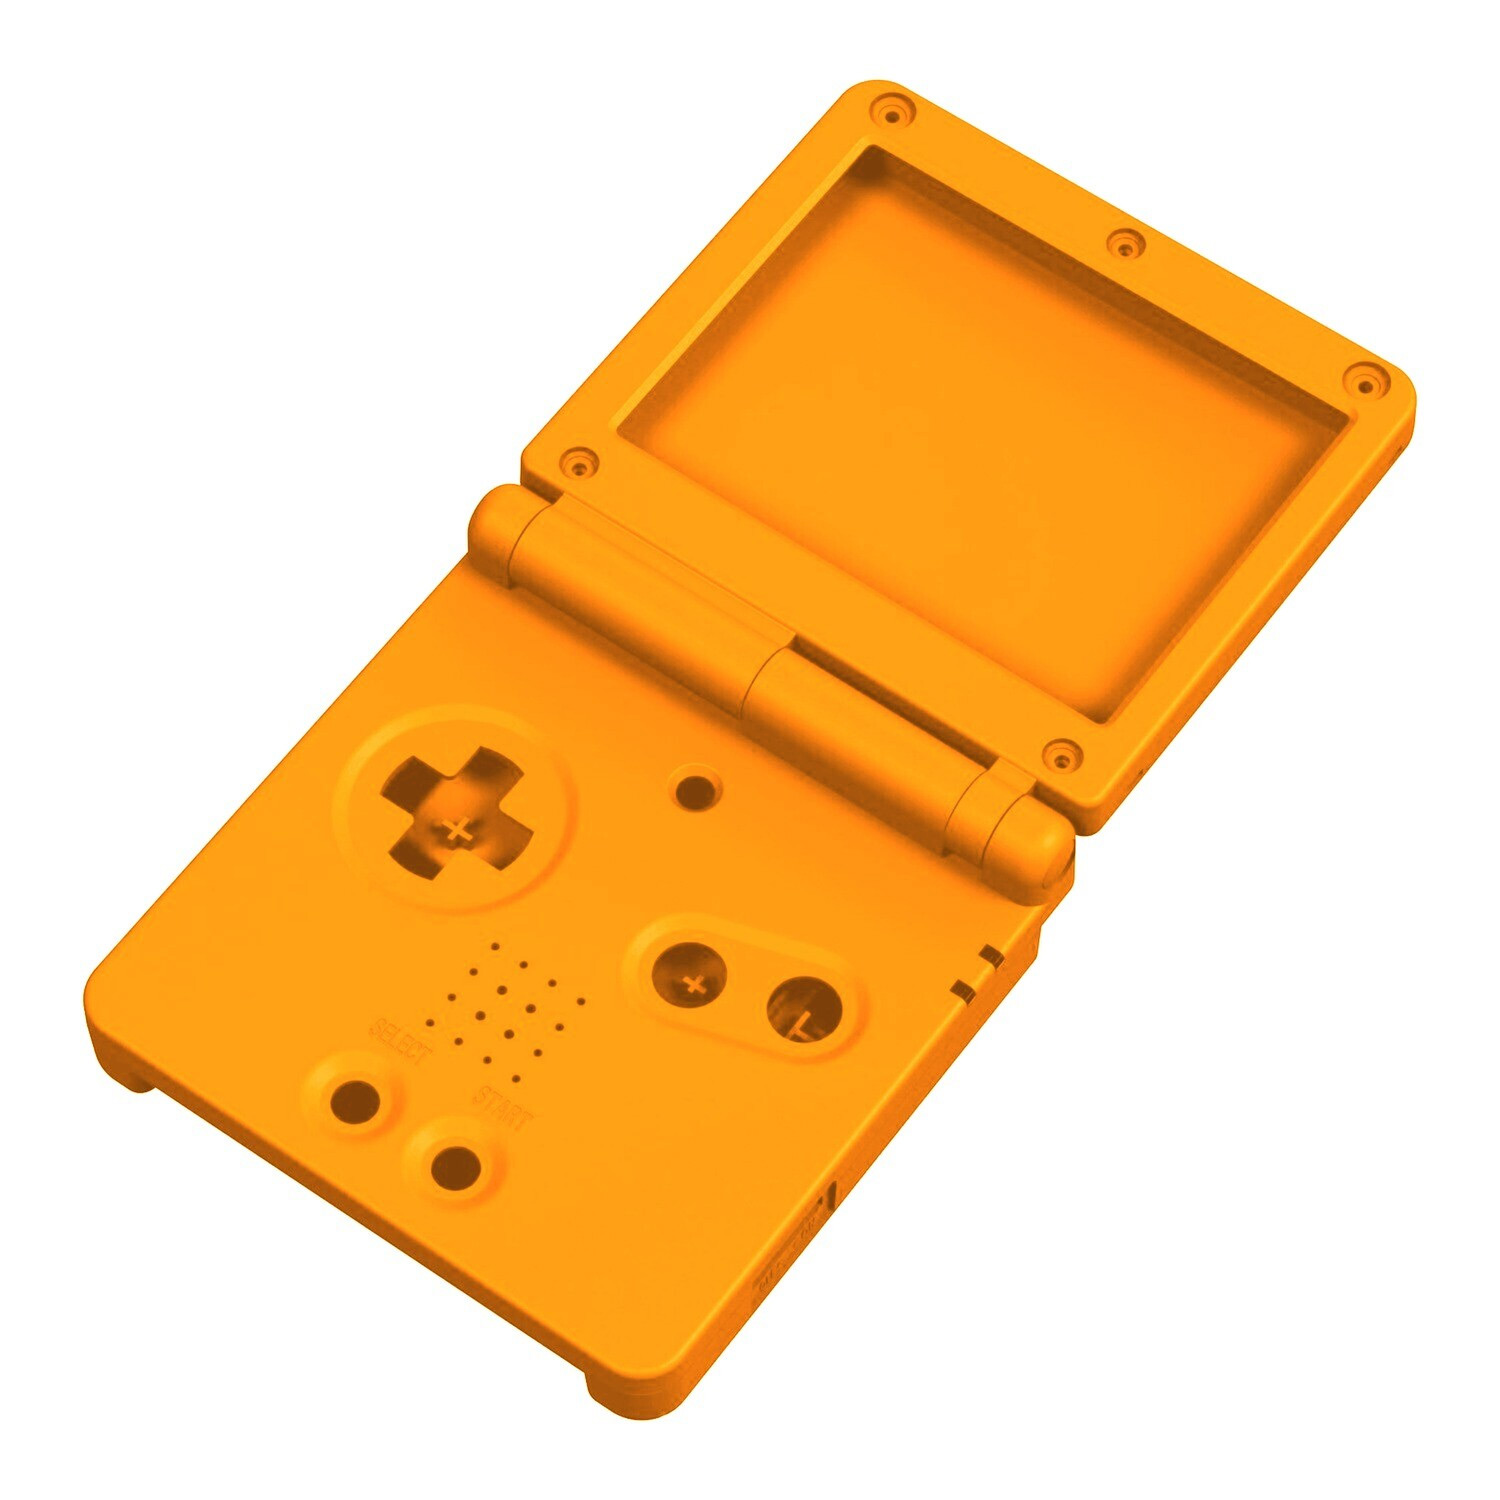 Game Boy Advance SP Etui (Solid Yellow)